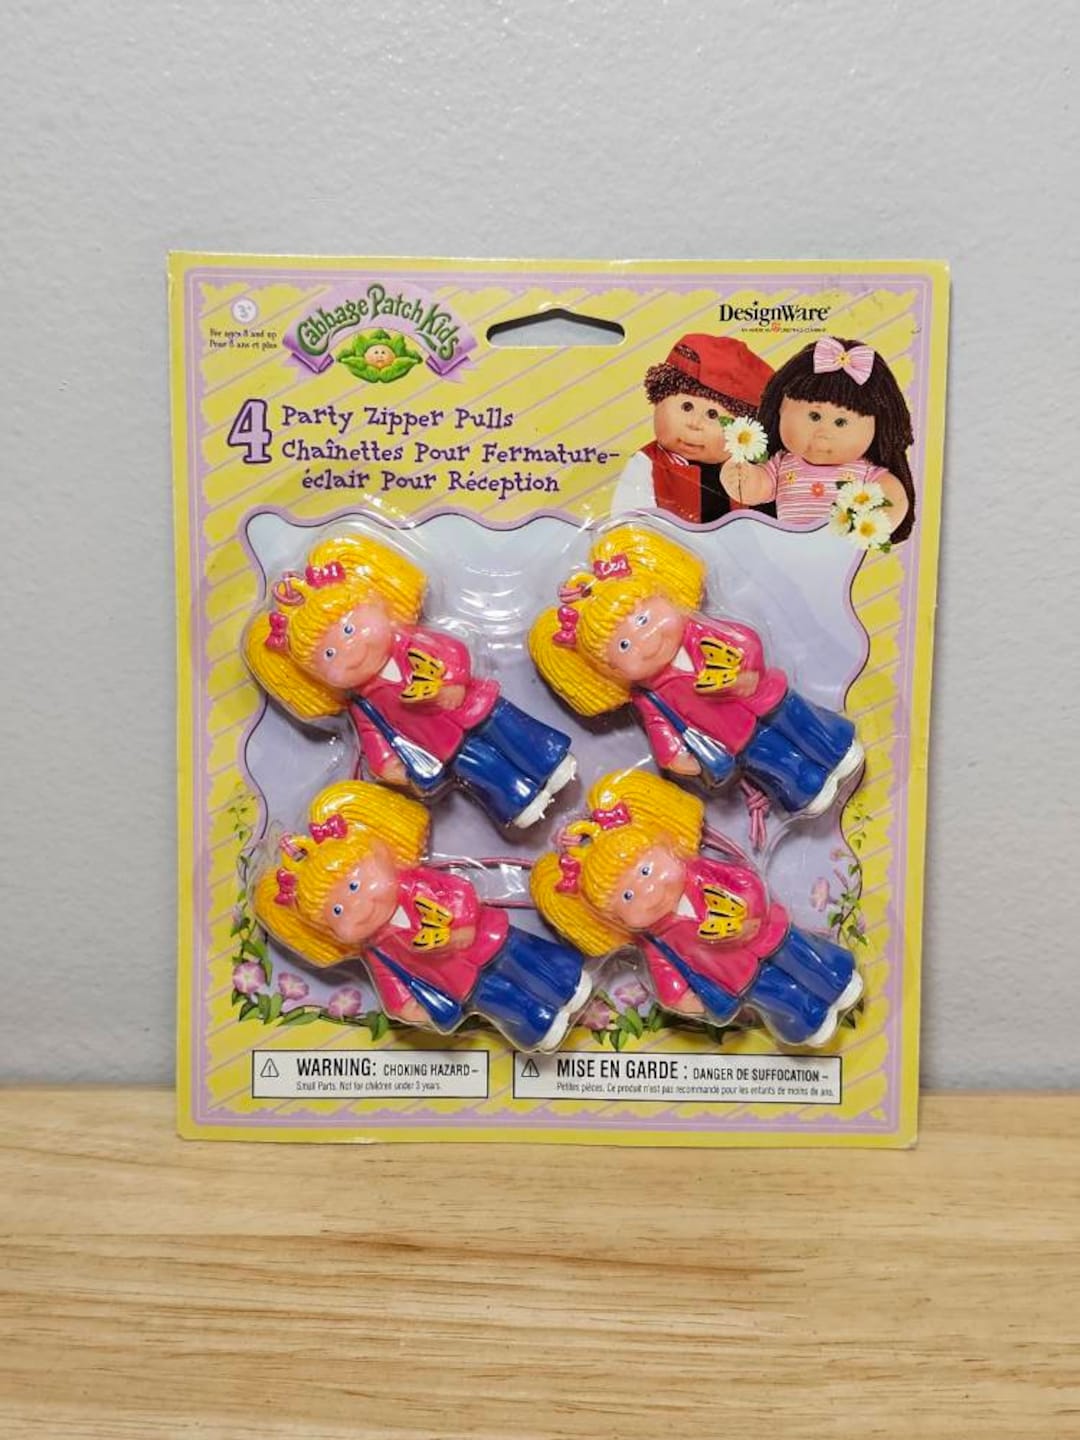 Cabbage Patch Kids Party Zipper Pulls 